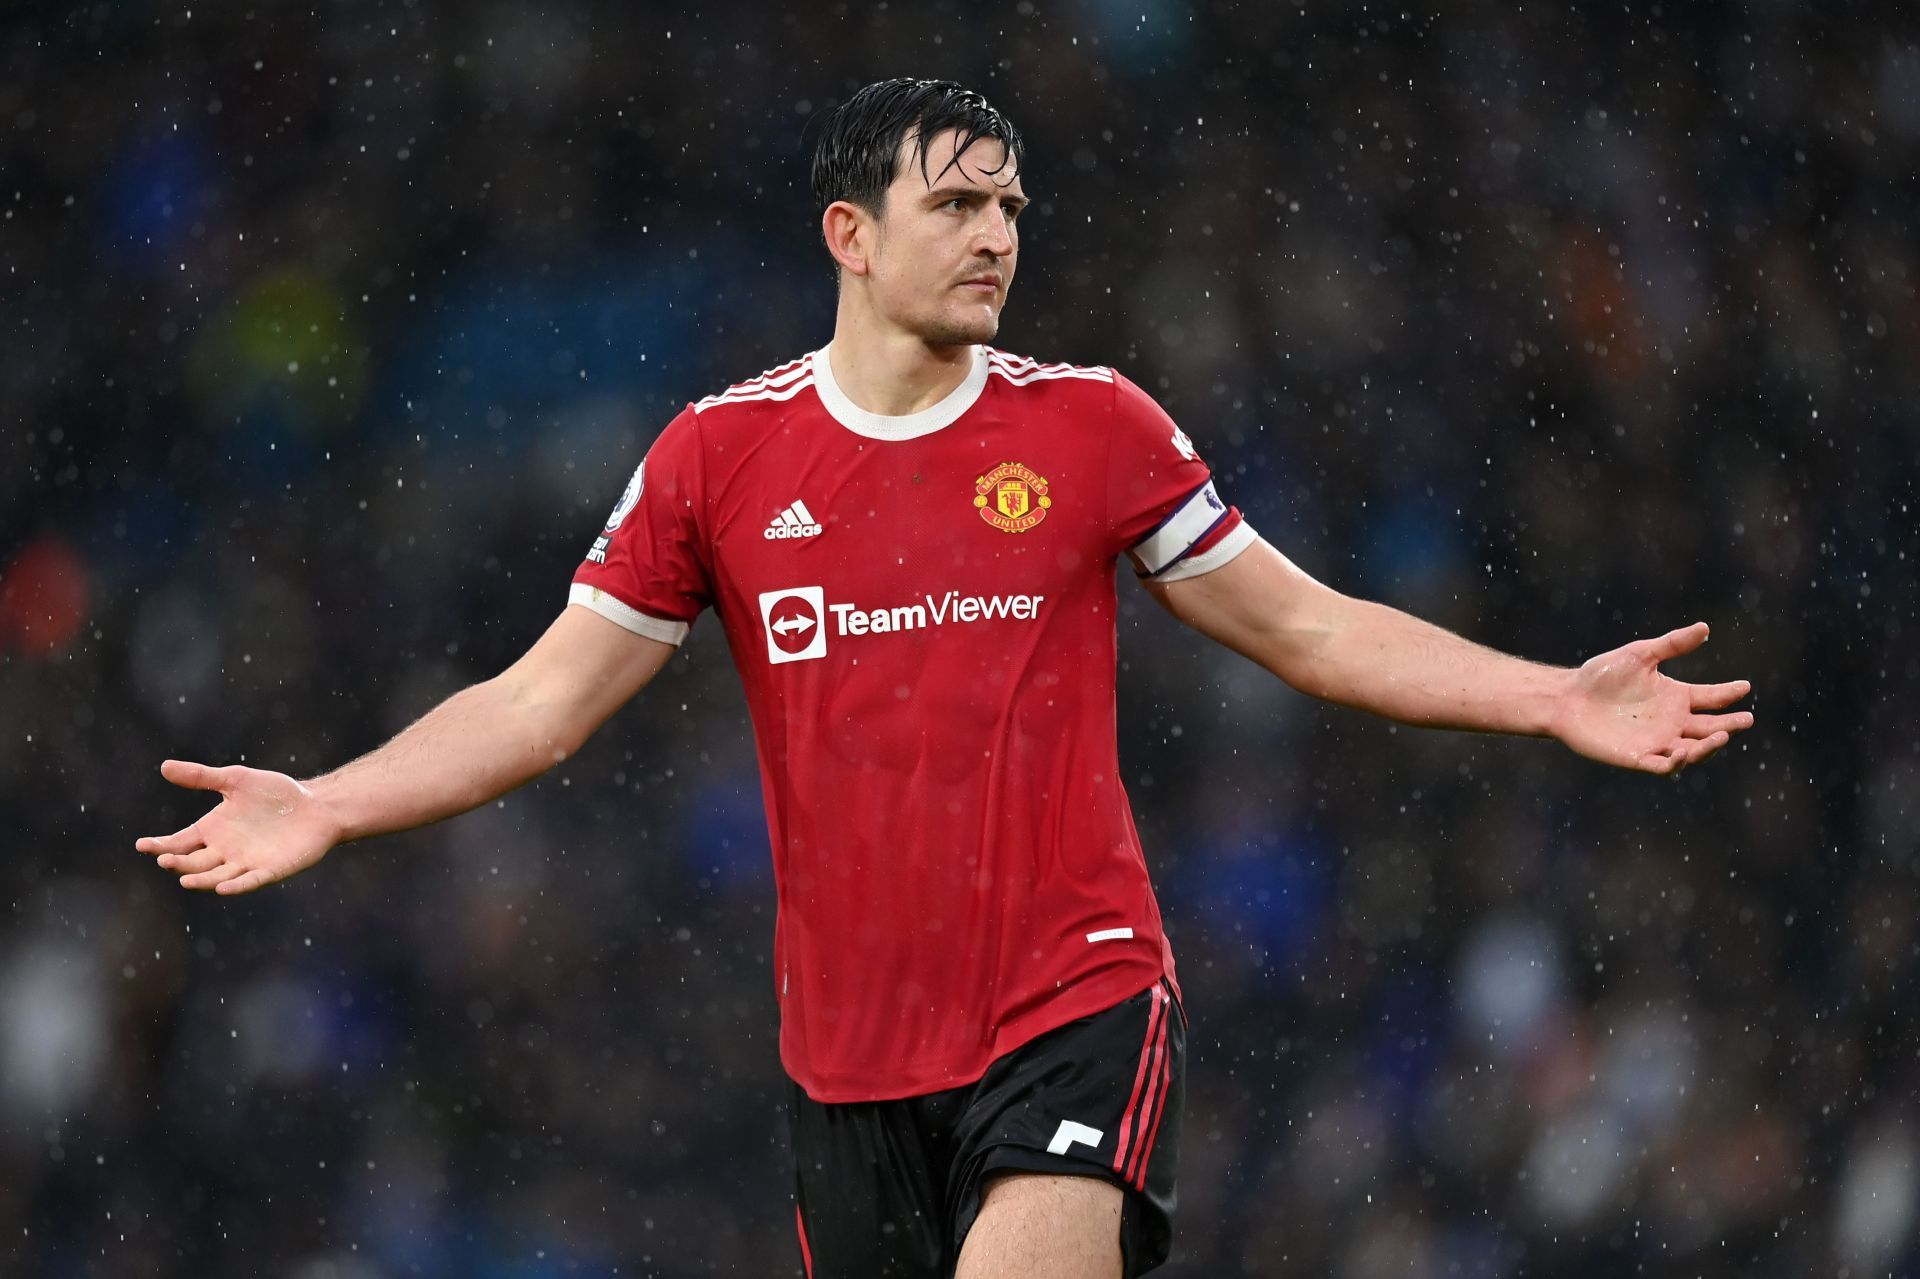 Manchester United can relieve Maguire of added pressure